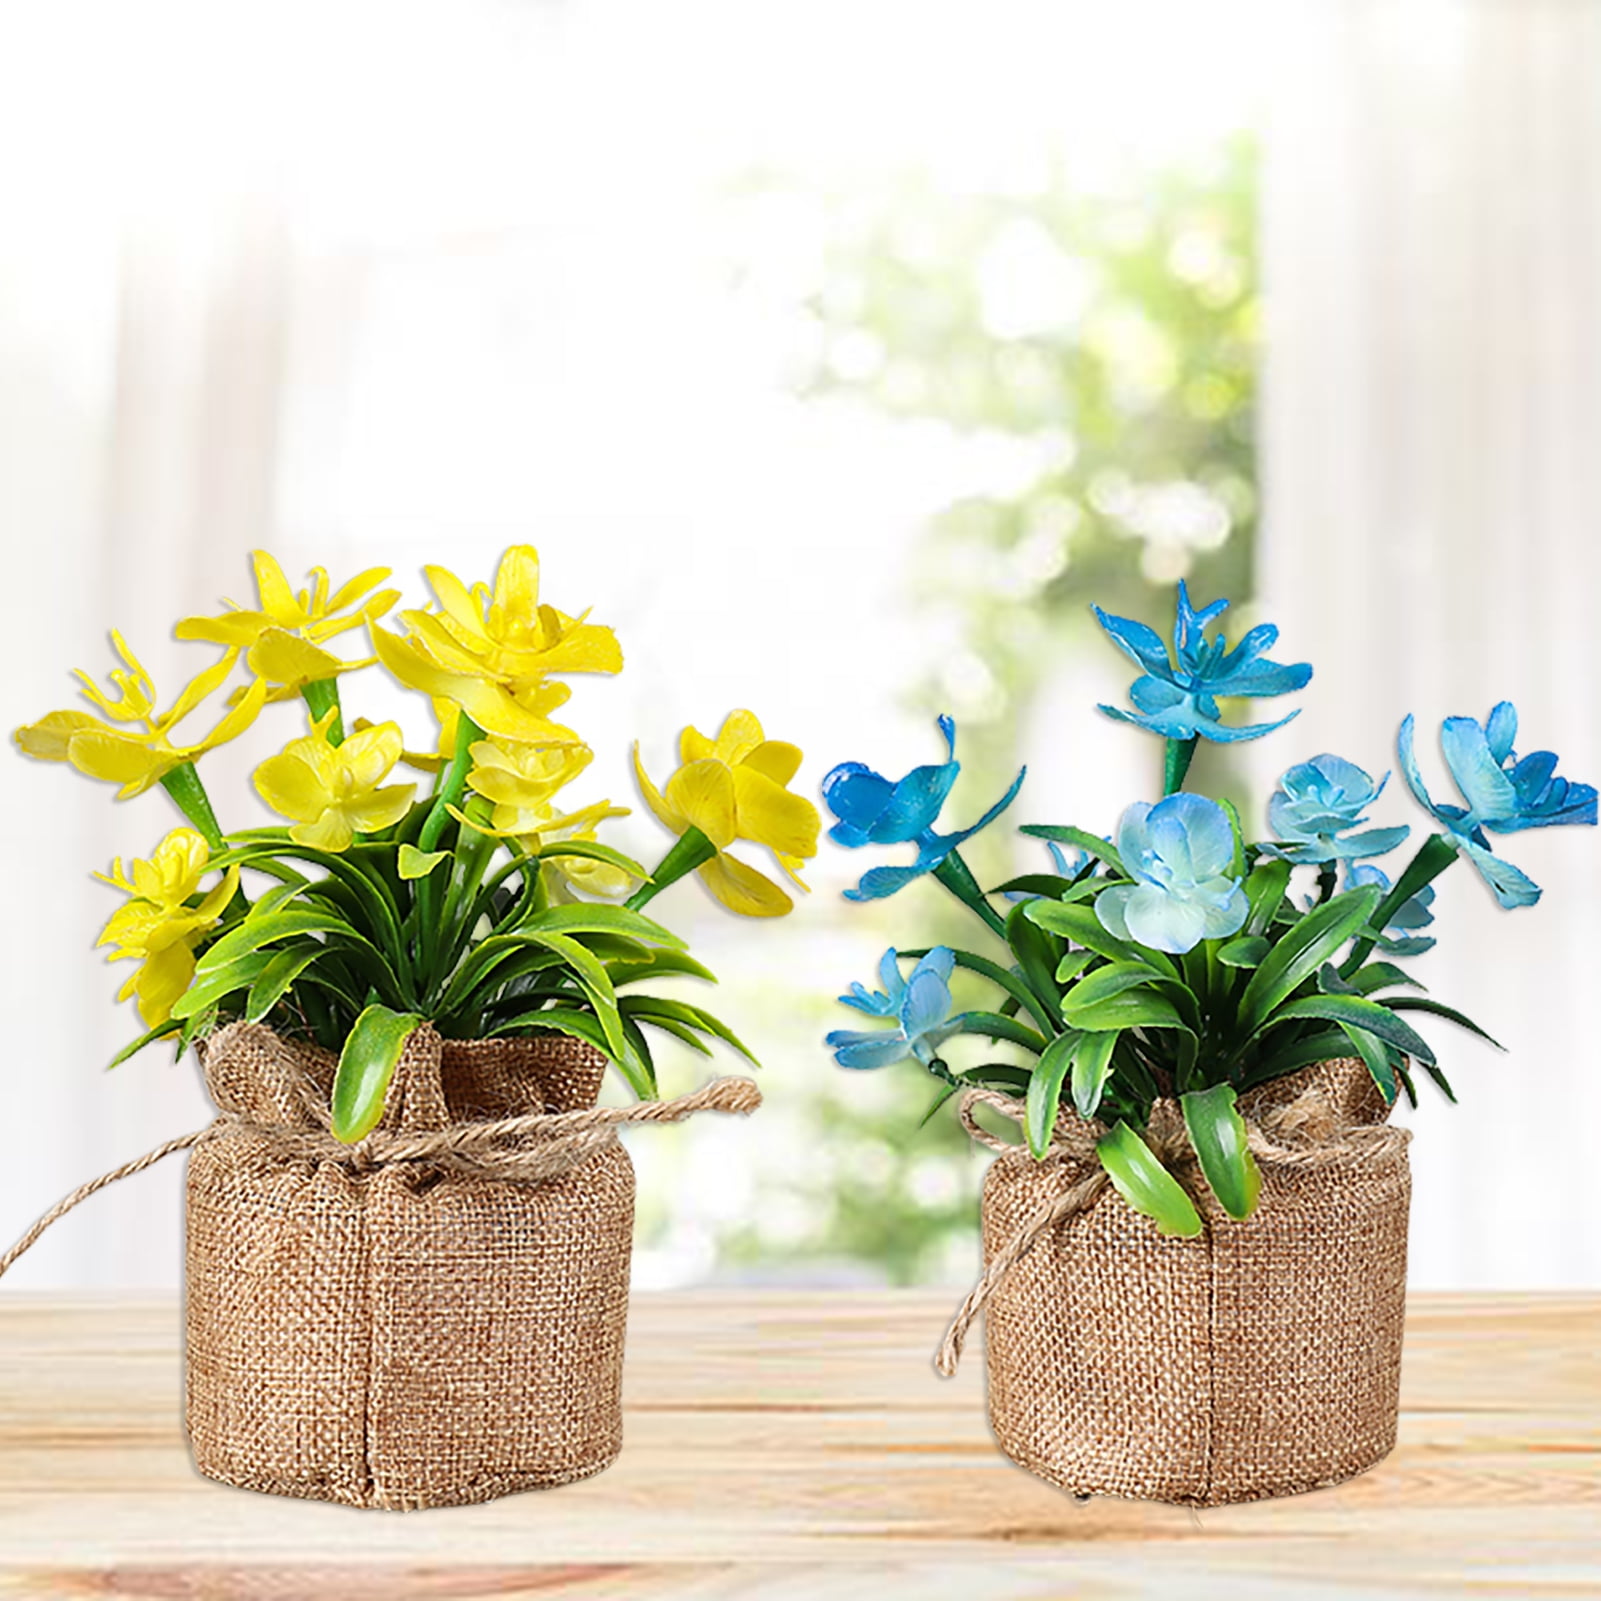 Artificial Miniature Flowers in a White Pot, Yellow and Red